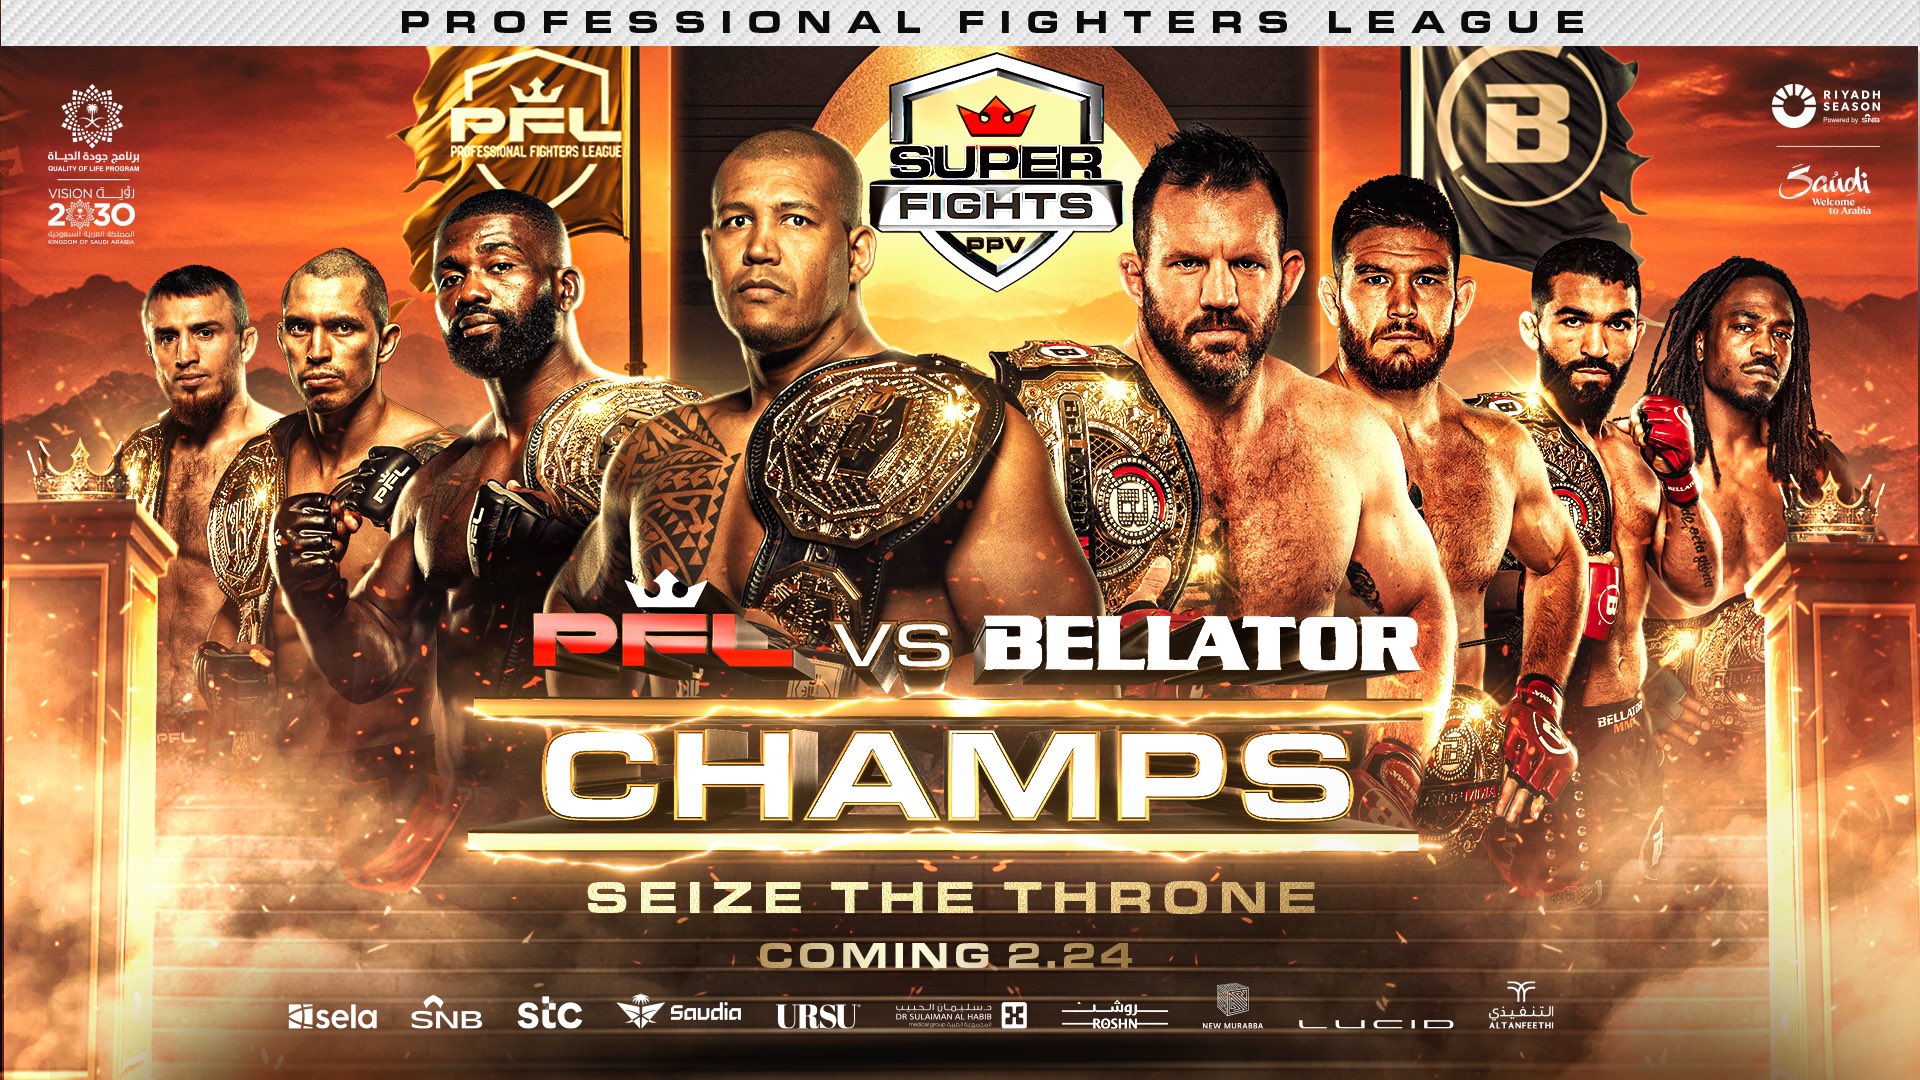 PFL vs. Bellator Champs Preview Which promotion comes out on top?